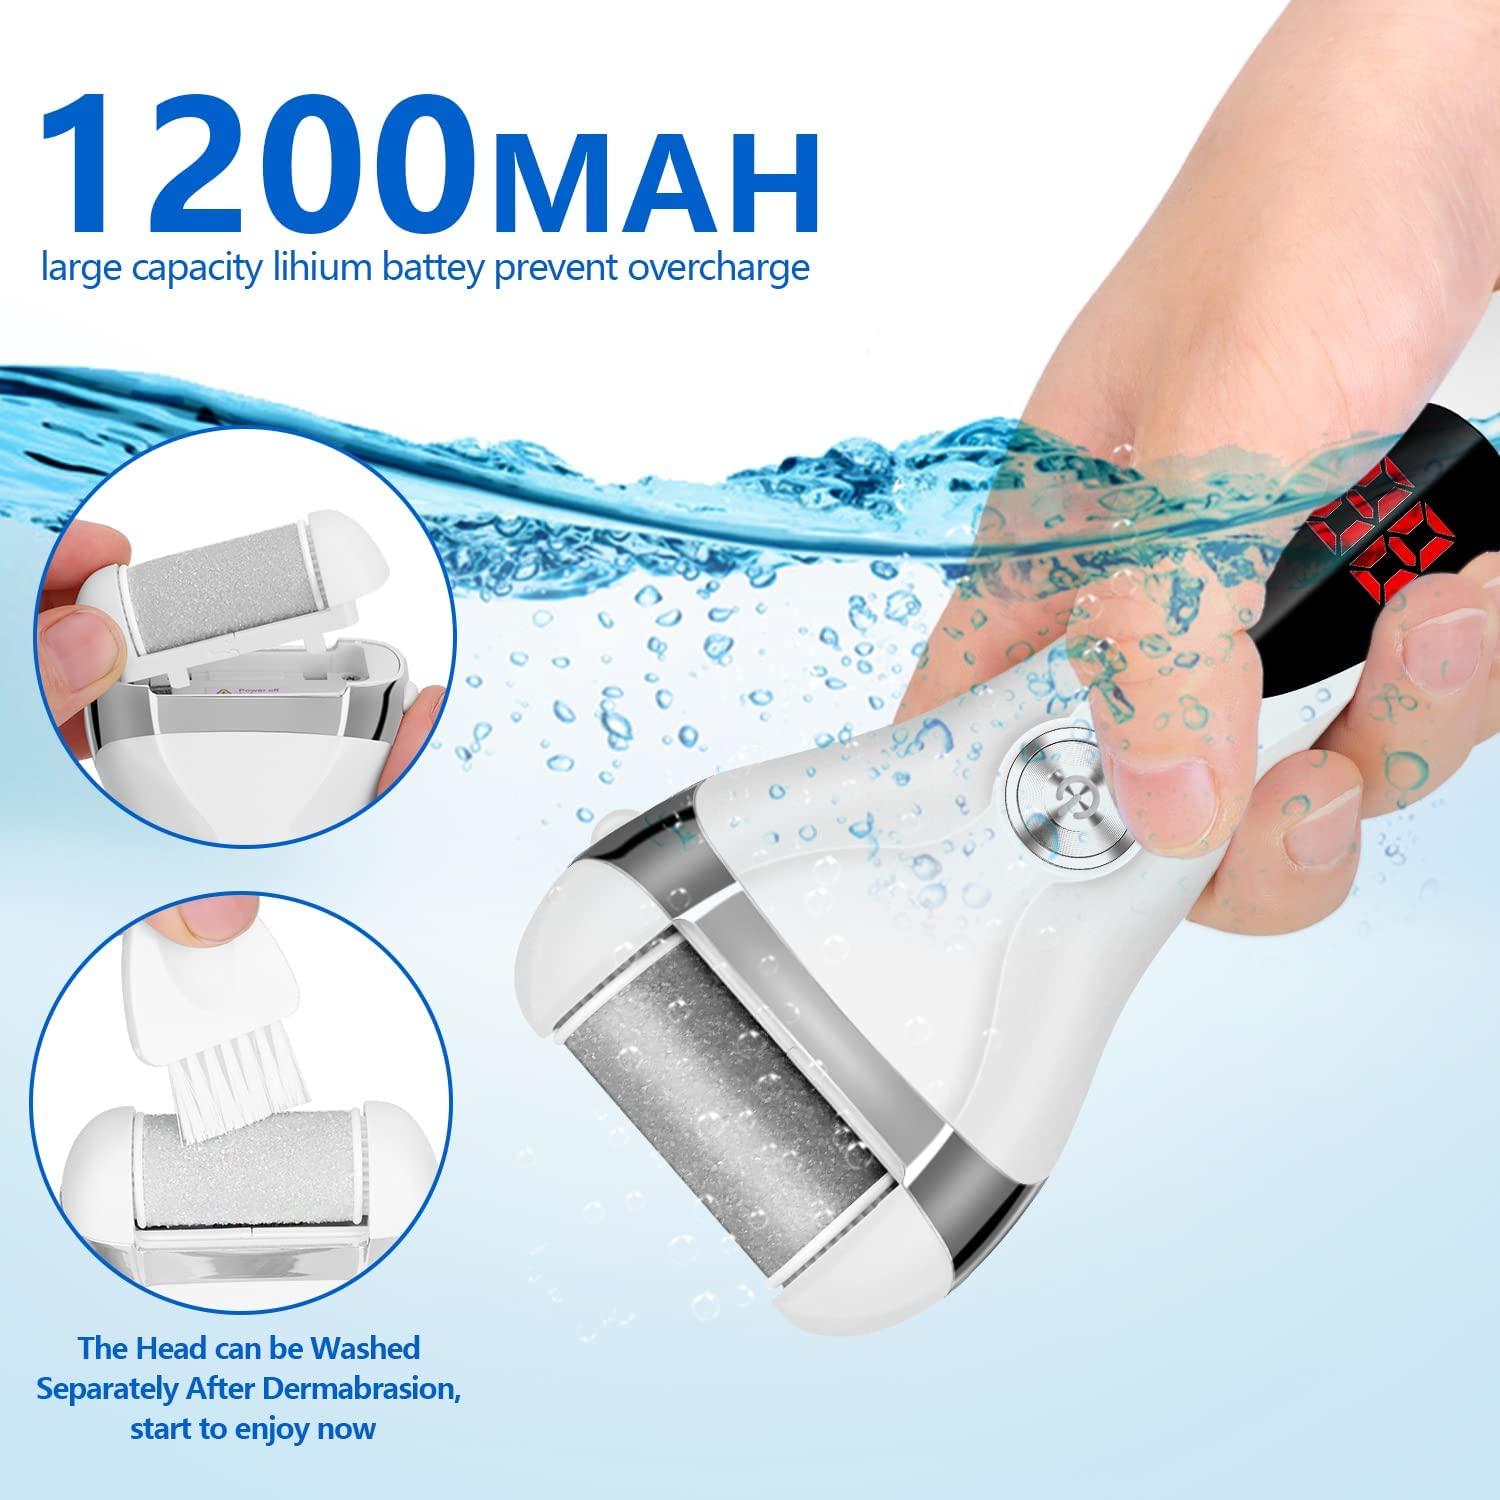 Electric Callus Remover for Feet - Waterproof with 1 Replaceable Abrasive Roller